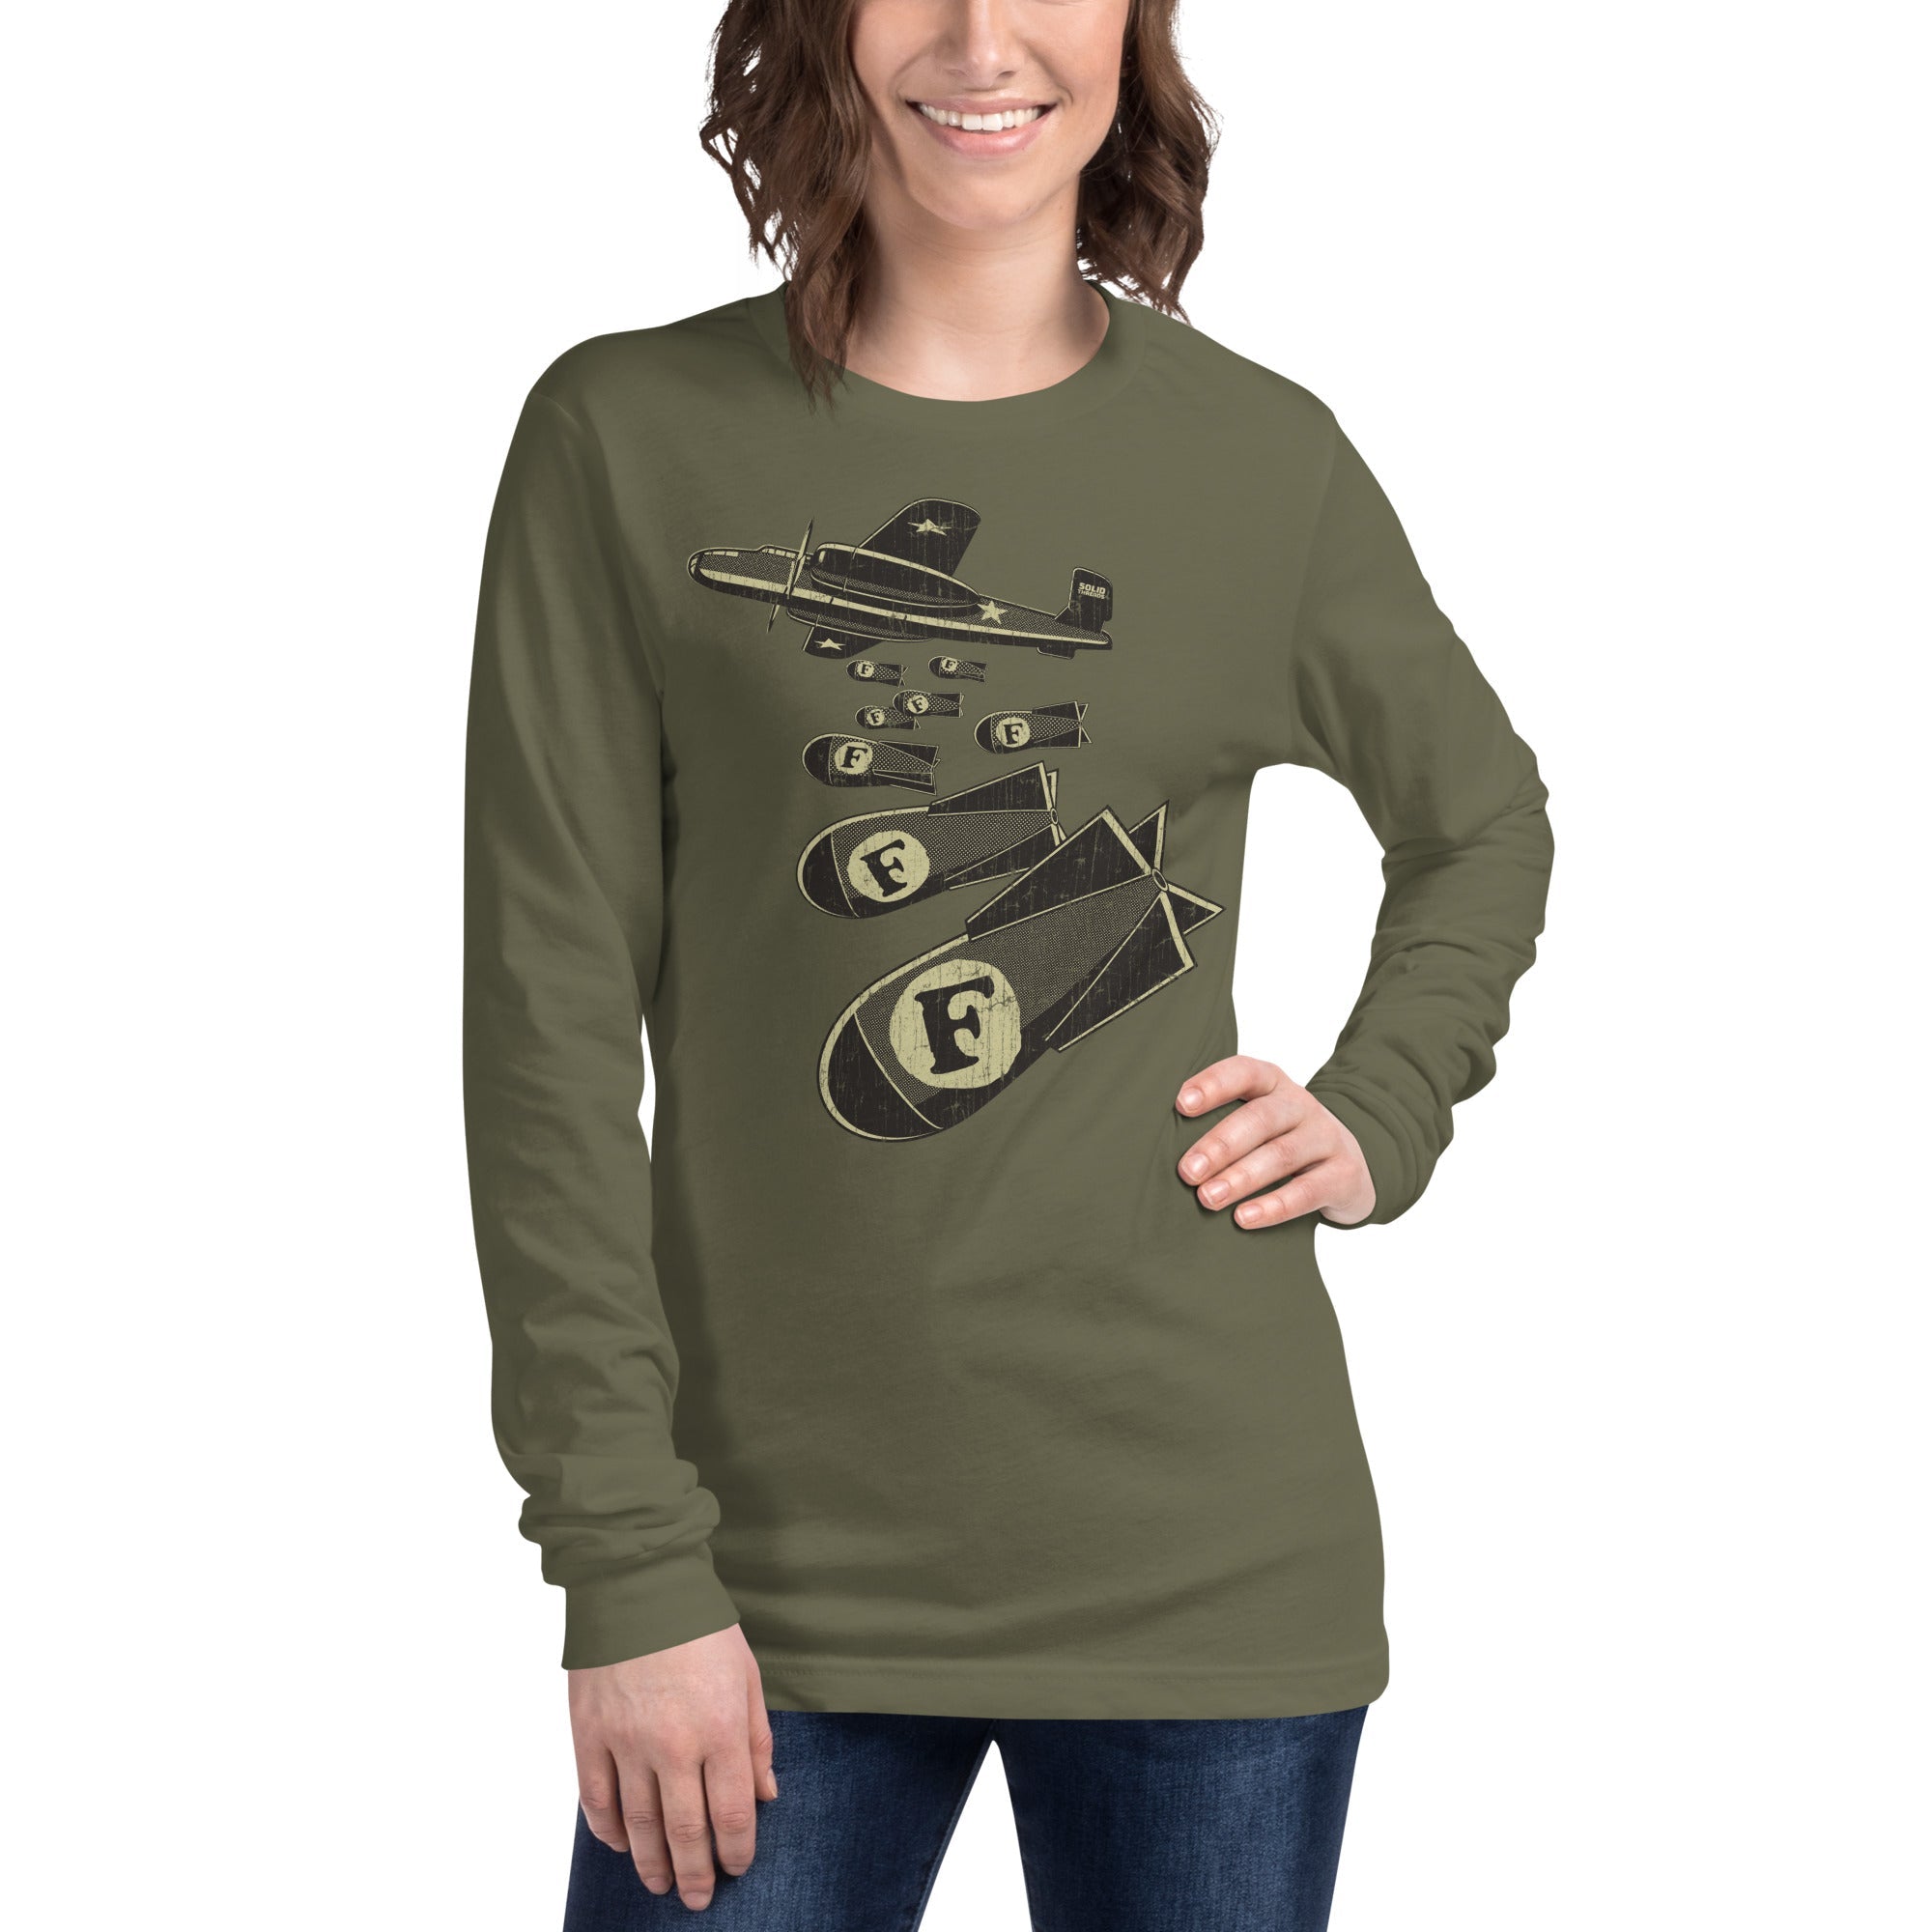 F Bombs Funny Double Entendre Long Sleeve Tee | Vintage Swearing Pun Soft T-Shirt | SOLID THREADS